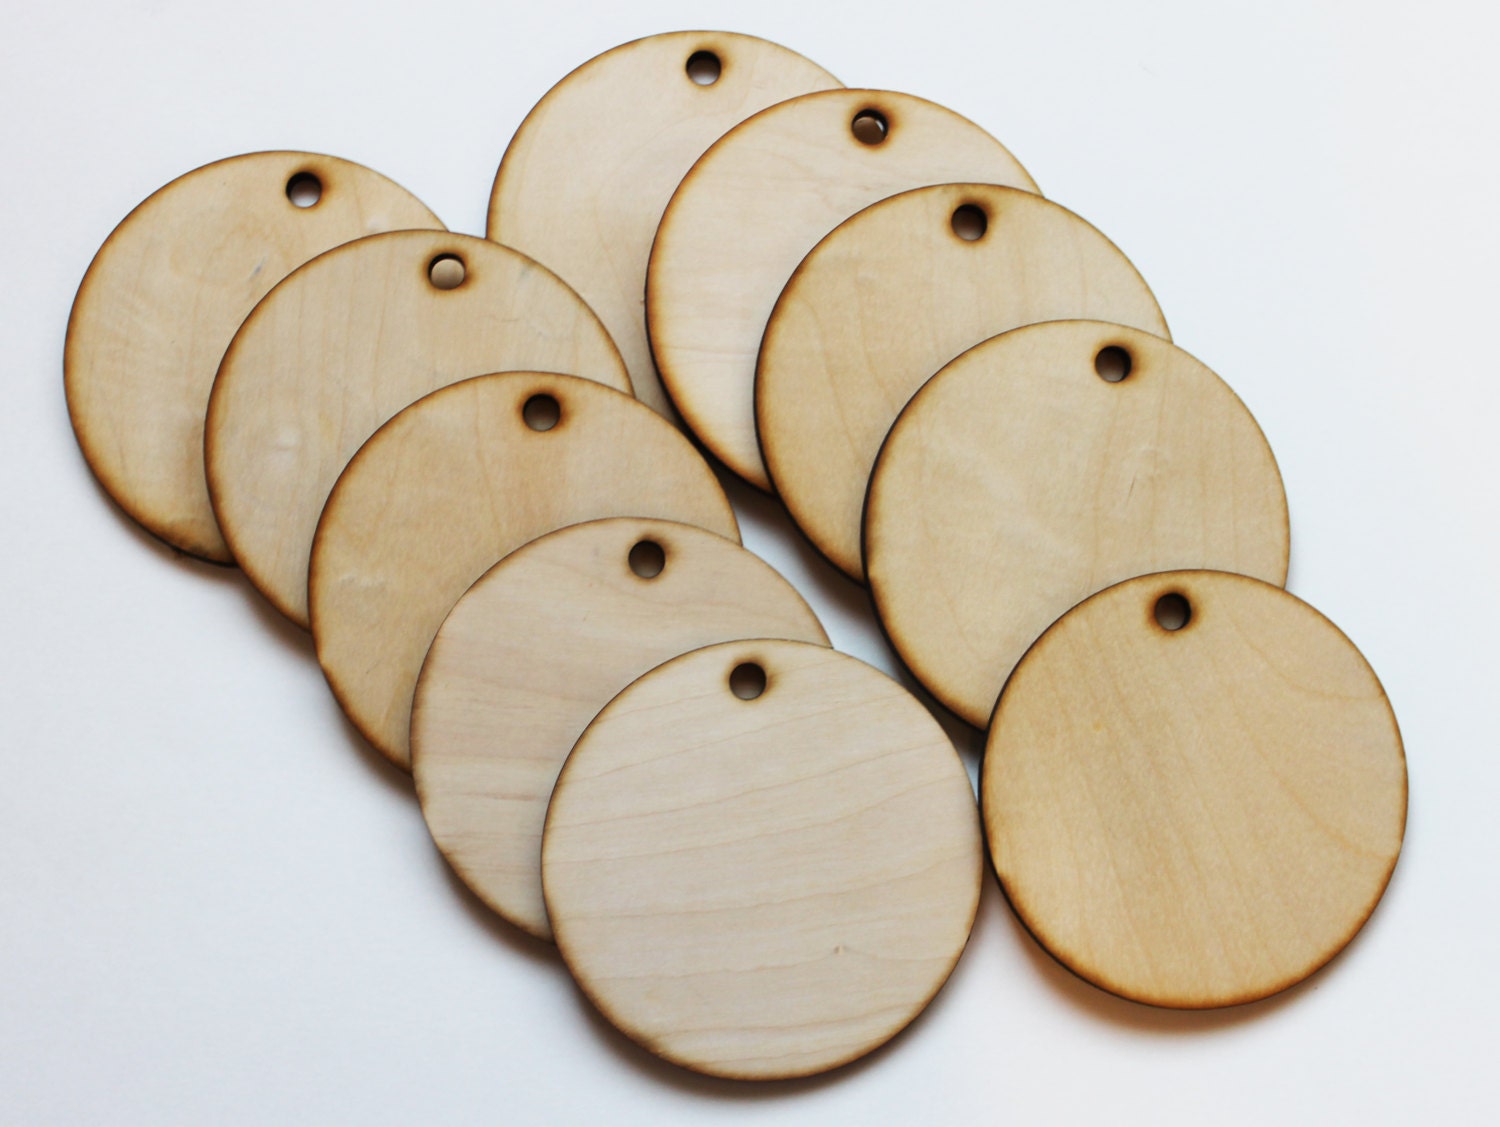 Round Wooden Discs, 100Pcs 20mm - Log Unfinished Wood Circles with Holes